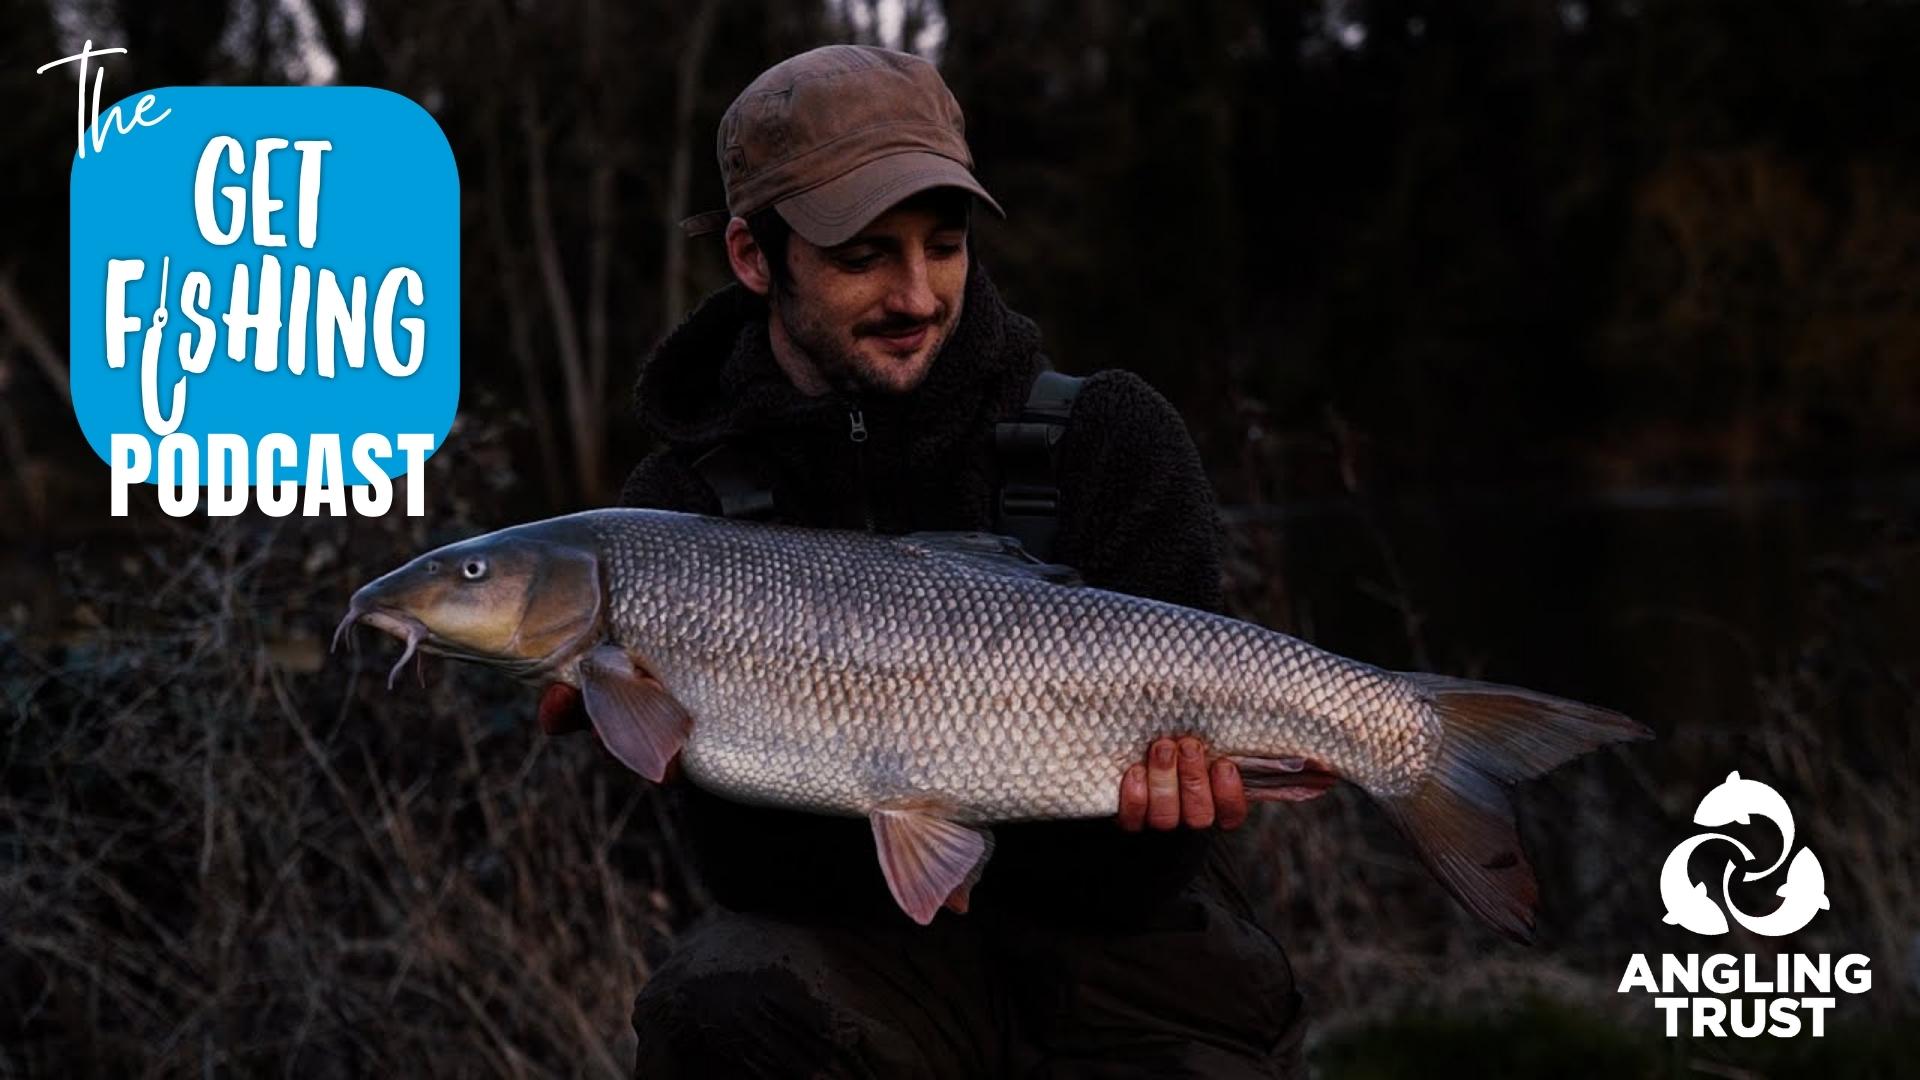 James Roche - EP. 8 - The Get Fishing Podcast with Jimmy Willis